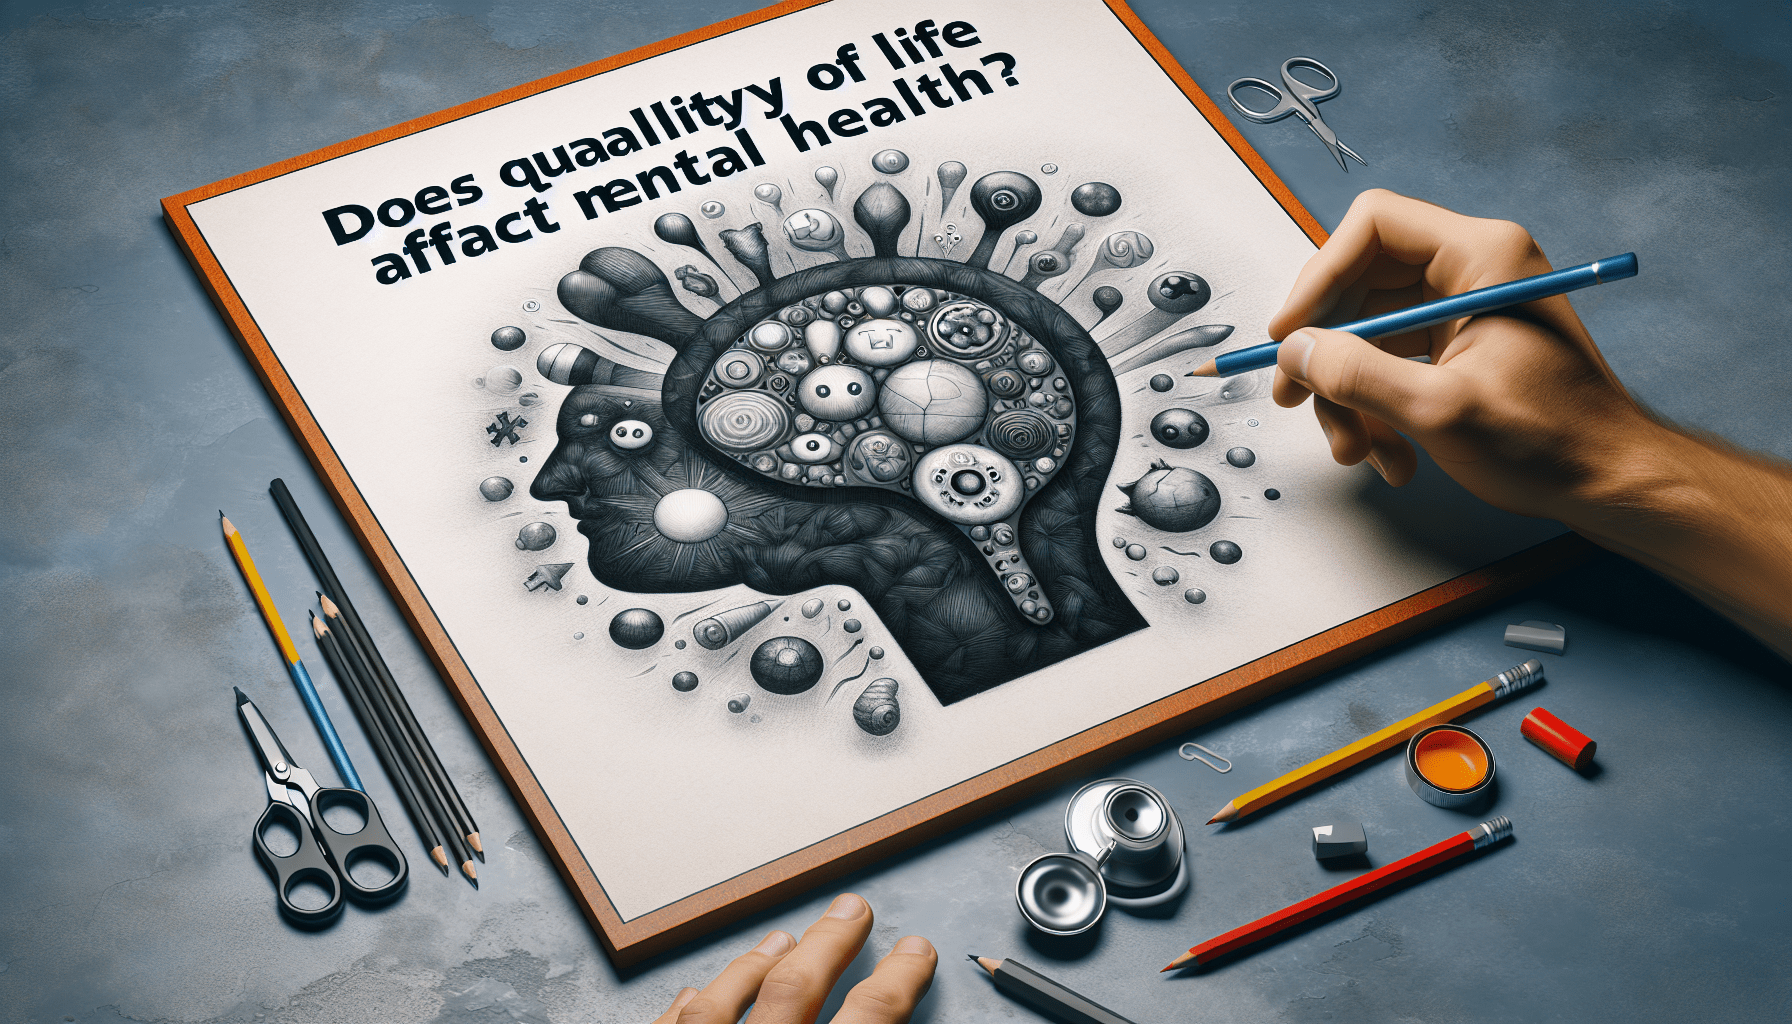 Does Quality Of Life Affect Mental Health?